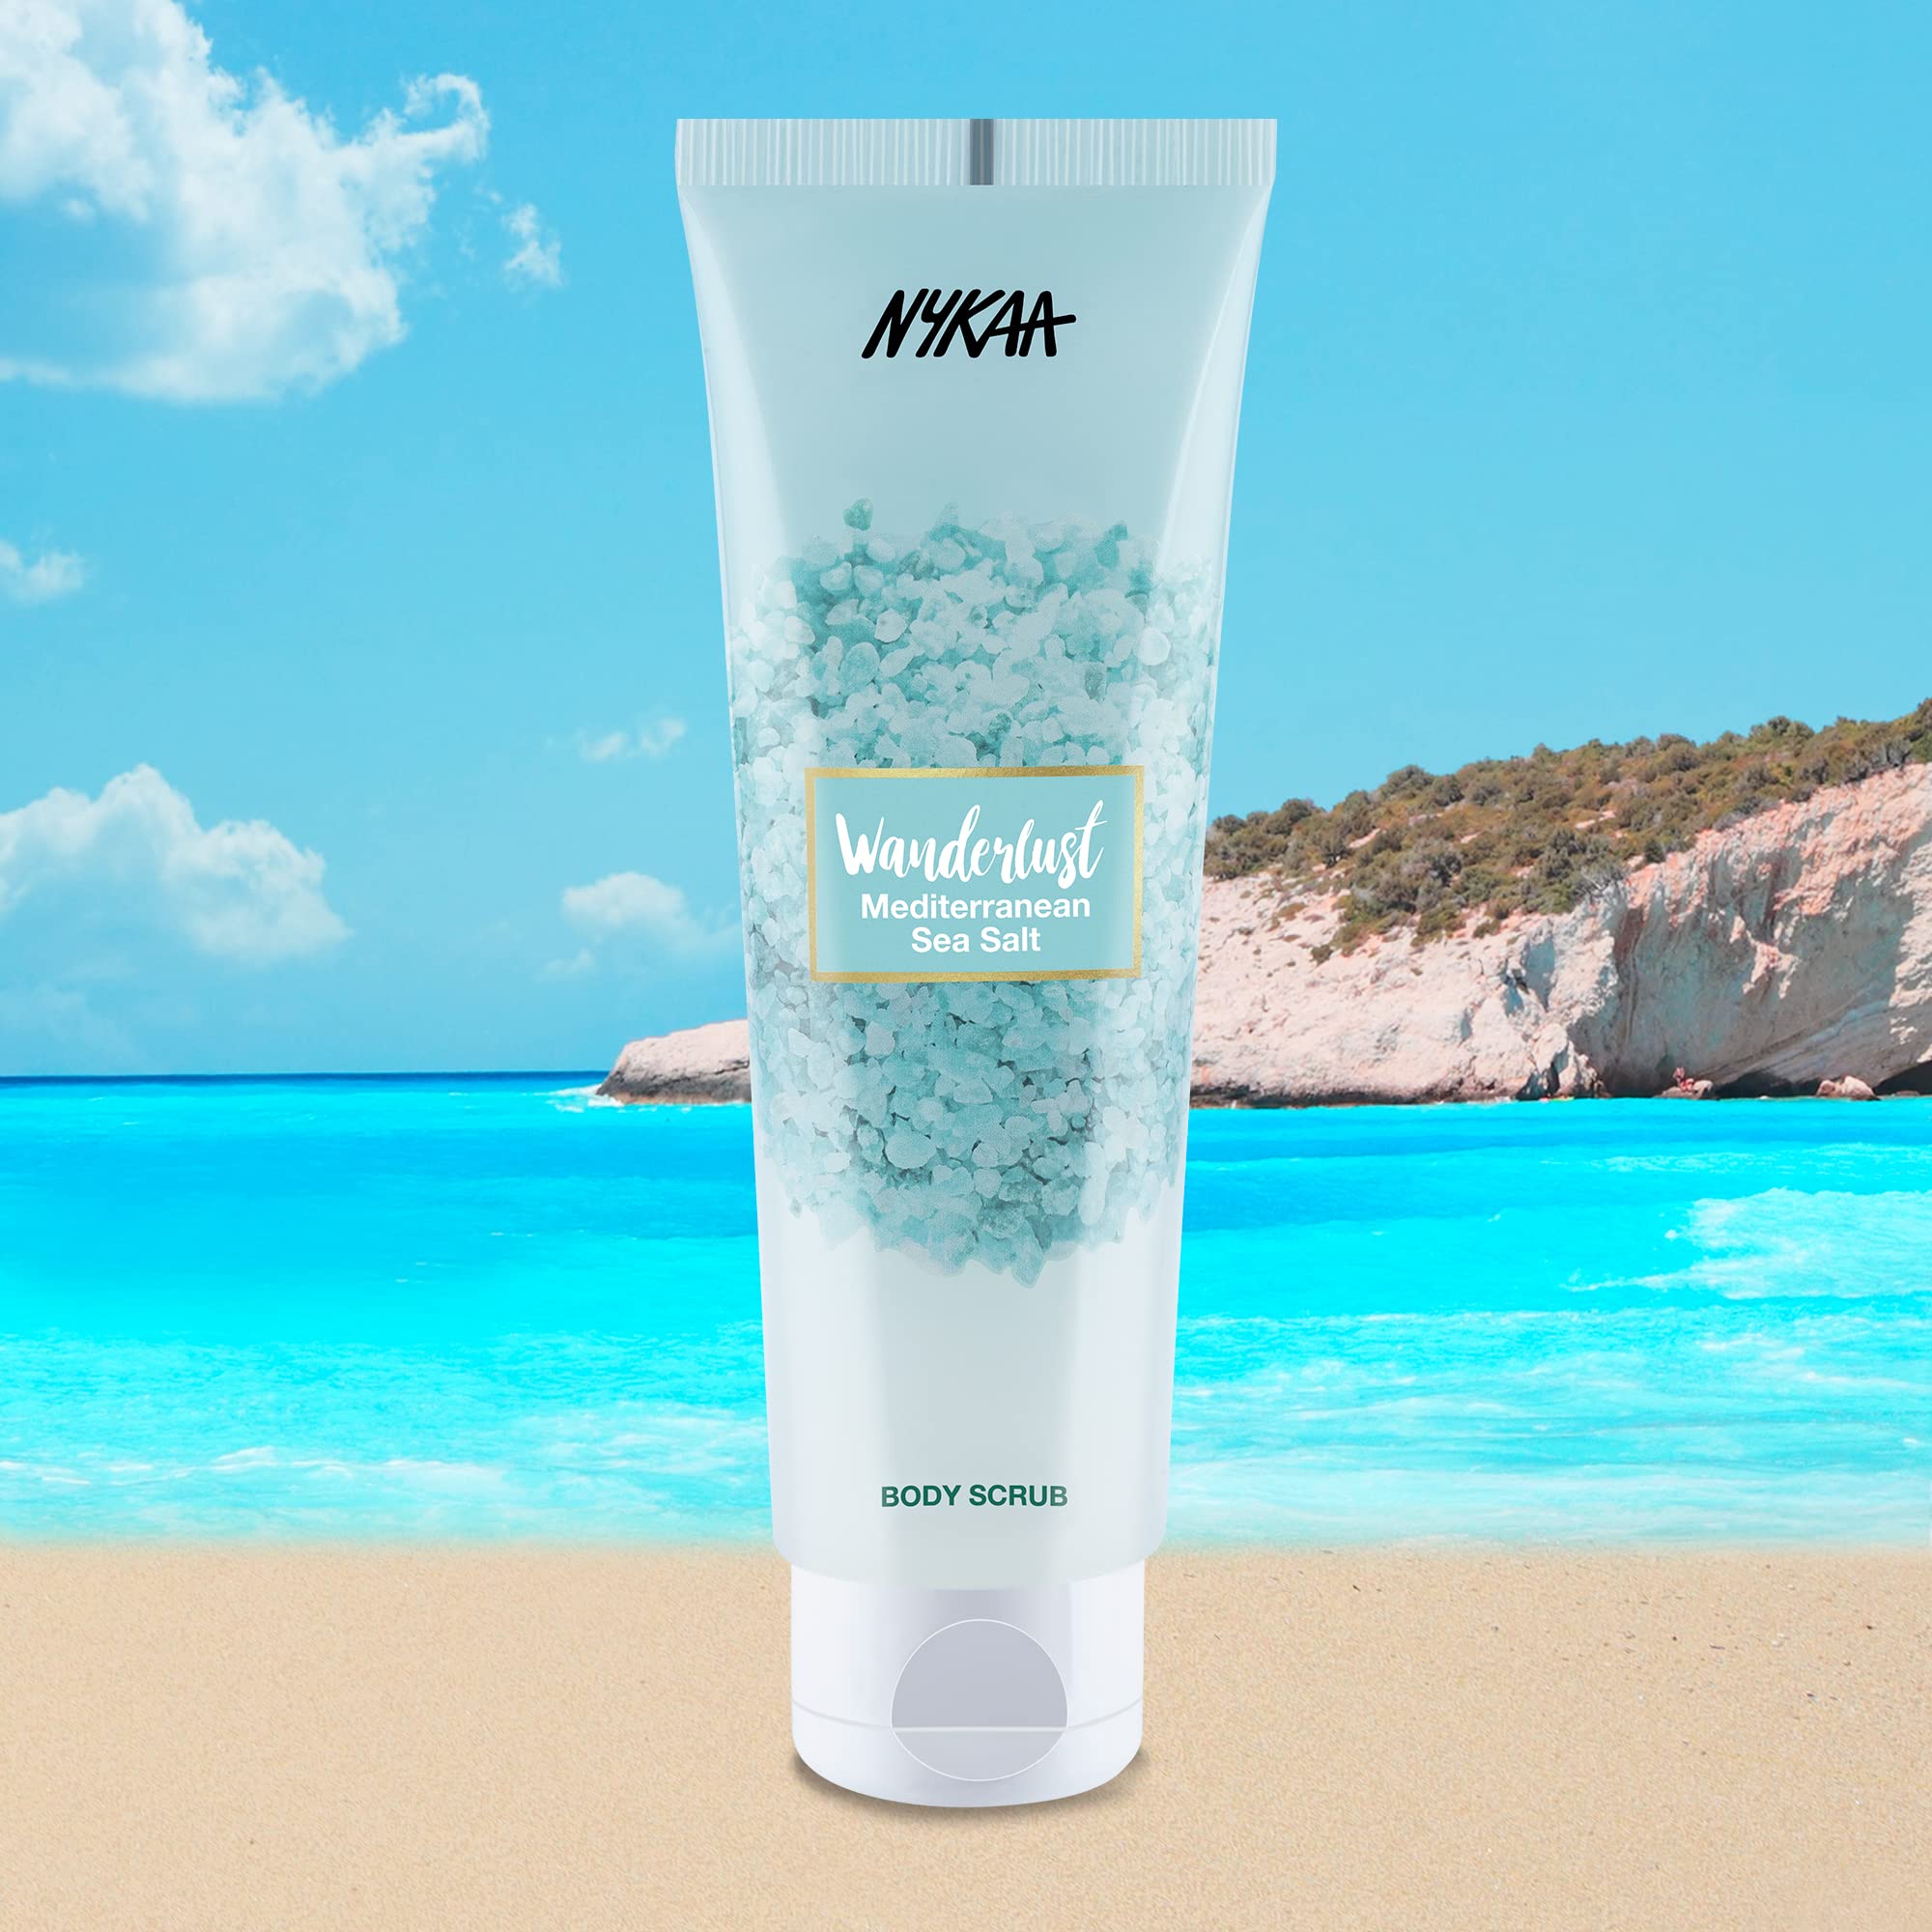 Nykaa Wanderlust Mediterranean Sea Salt Body Scrub - Enriched with Aloe Vera - Prevents Moisture Loss, Reviving Dull and Dry Skin - Sodium and Sulphate Free, Paraben Free - 140gm